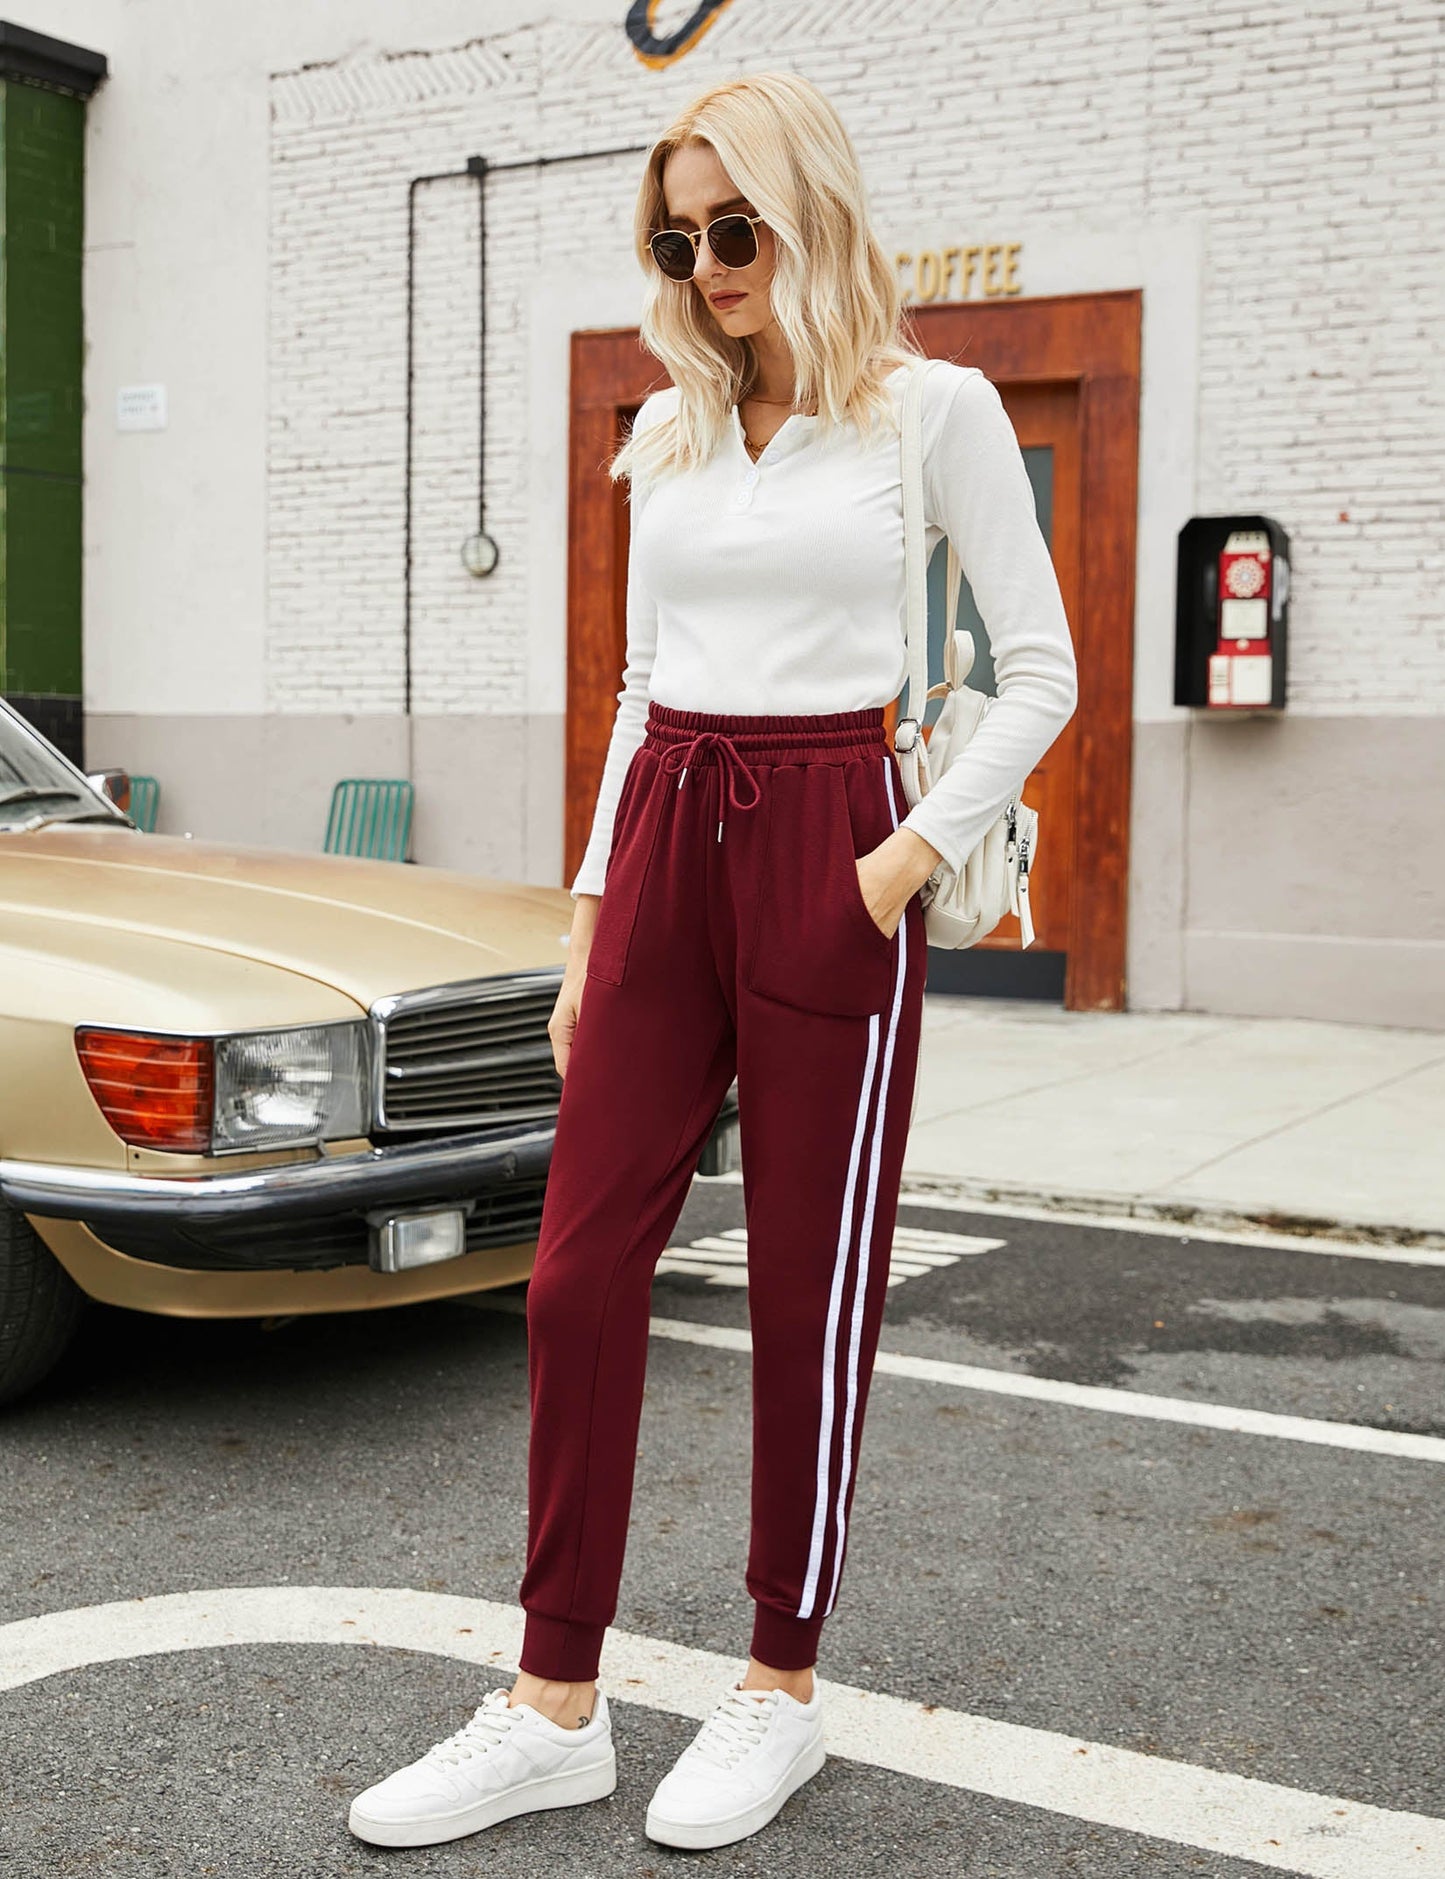 YESFASHION Women's Pockets Casual Sports Pants Wine Red